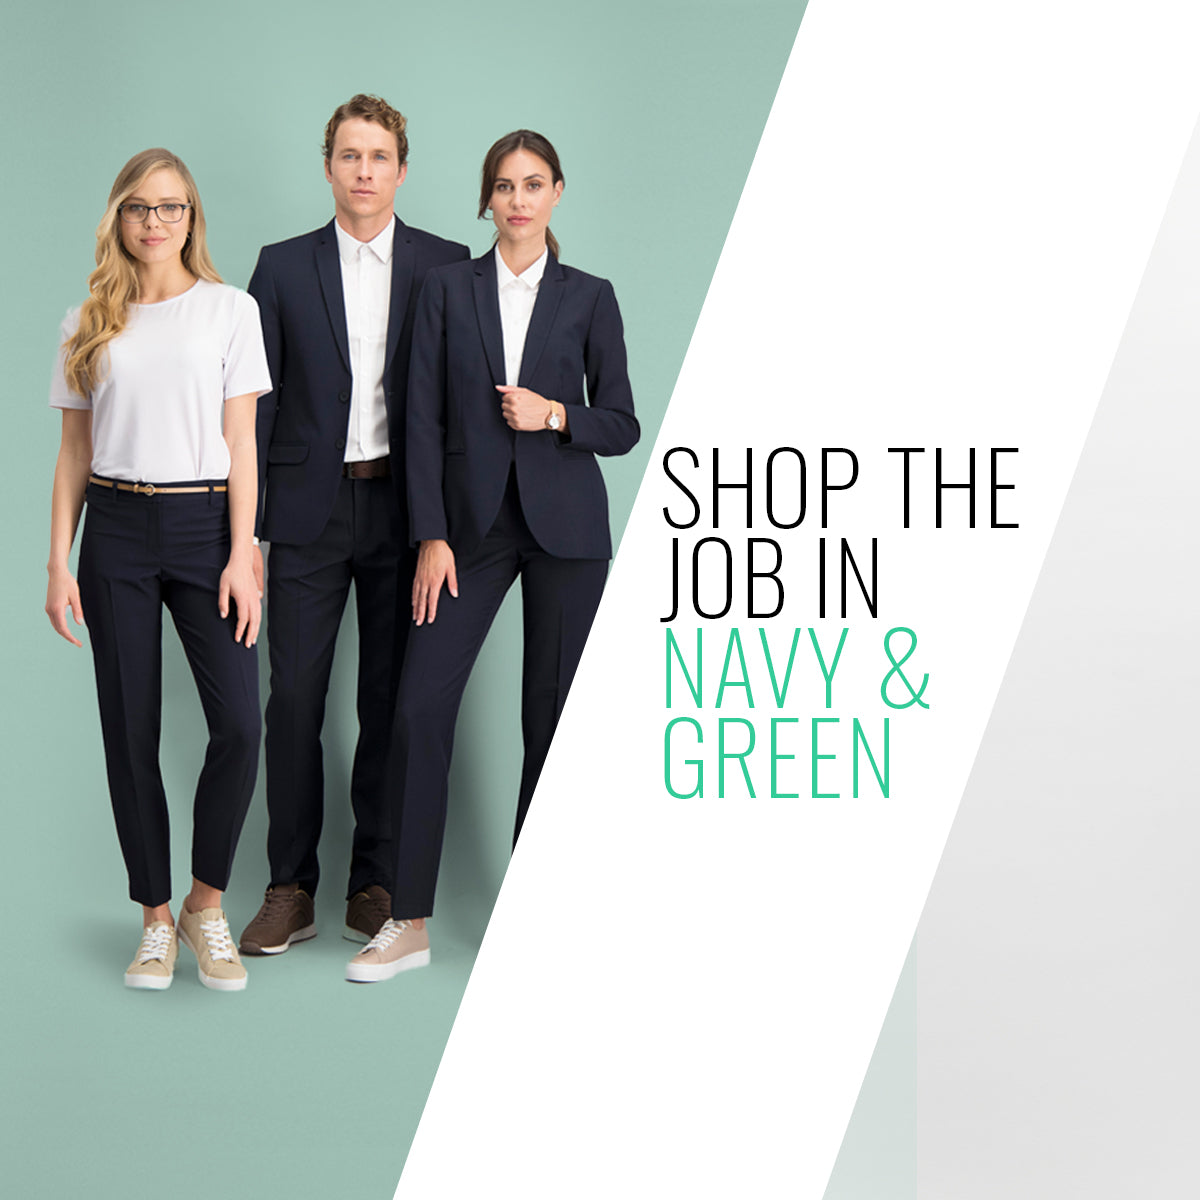 Shop the Job in Navy & Green